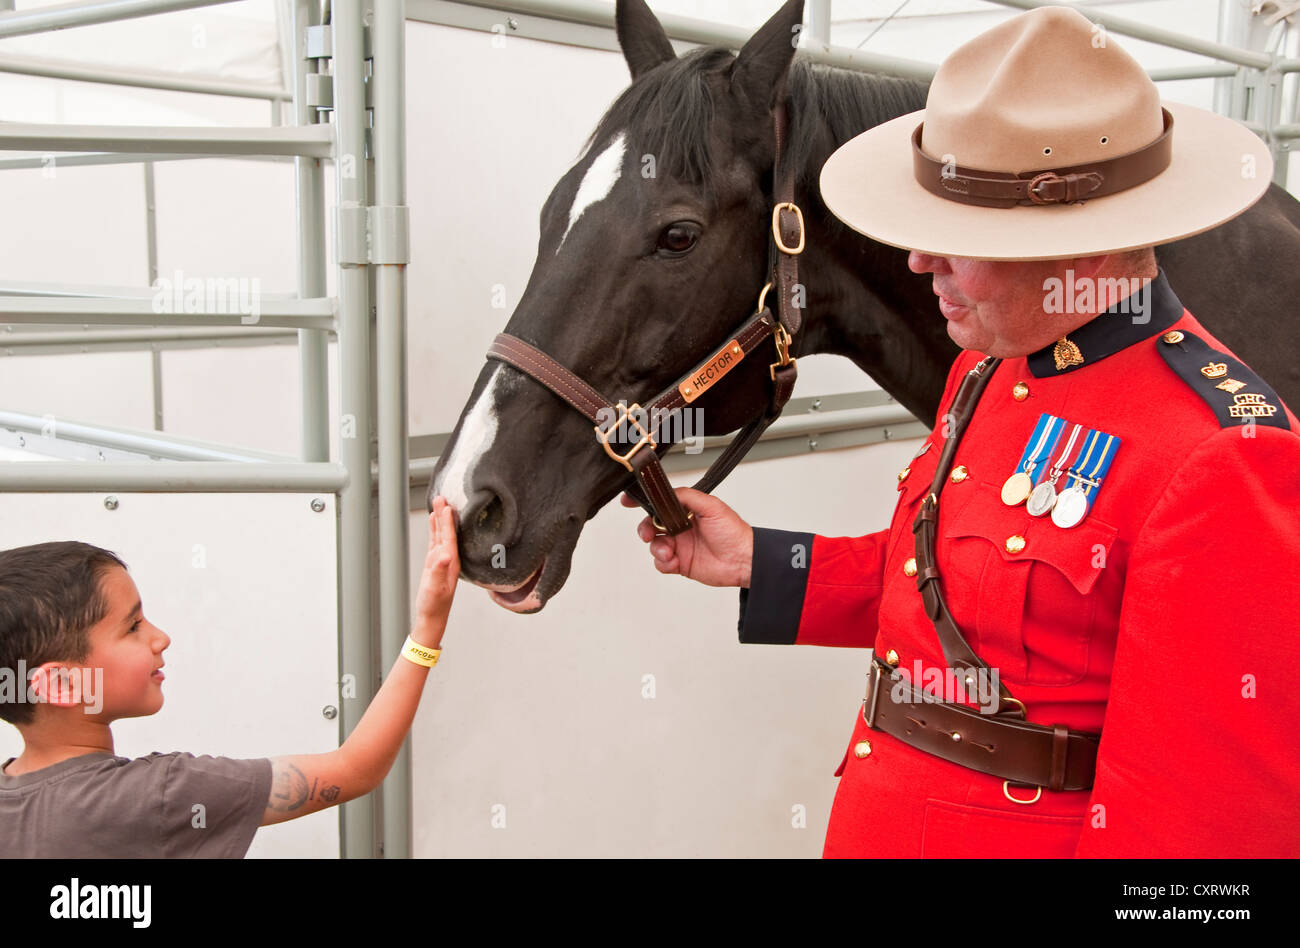 Young man meeting Hector, Royal Canadian Mounted Police horse, in stables at the Calgary Stampede 2012. Stock Photo